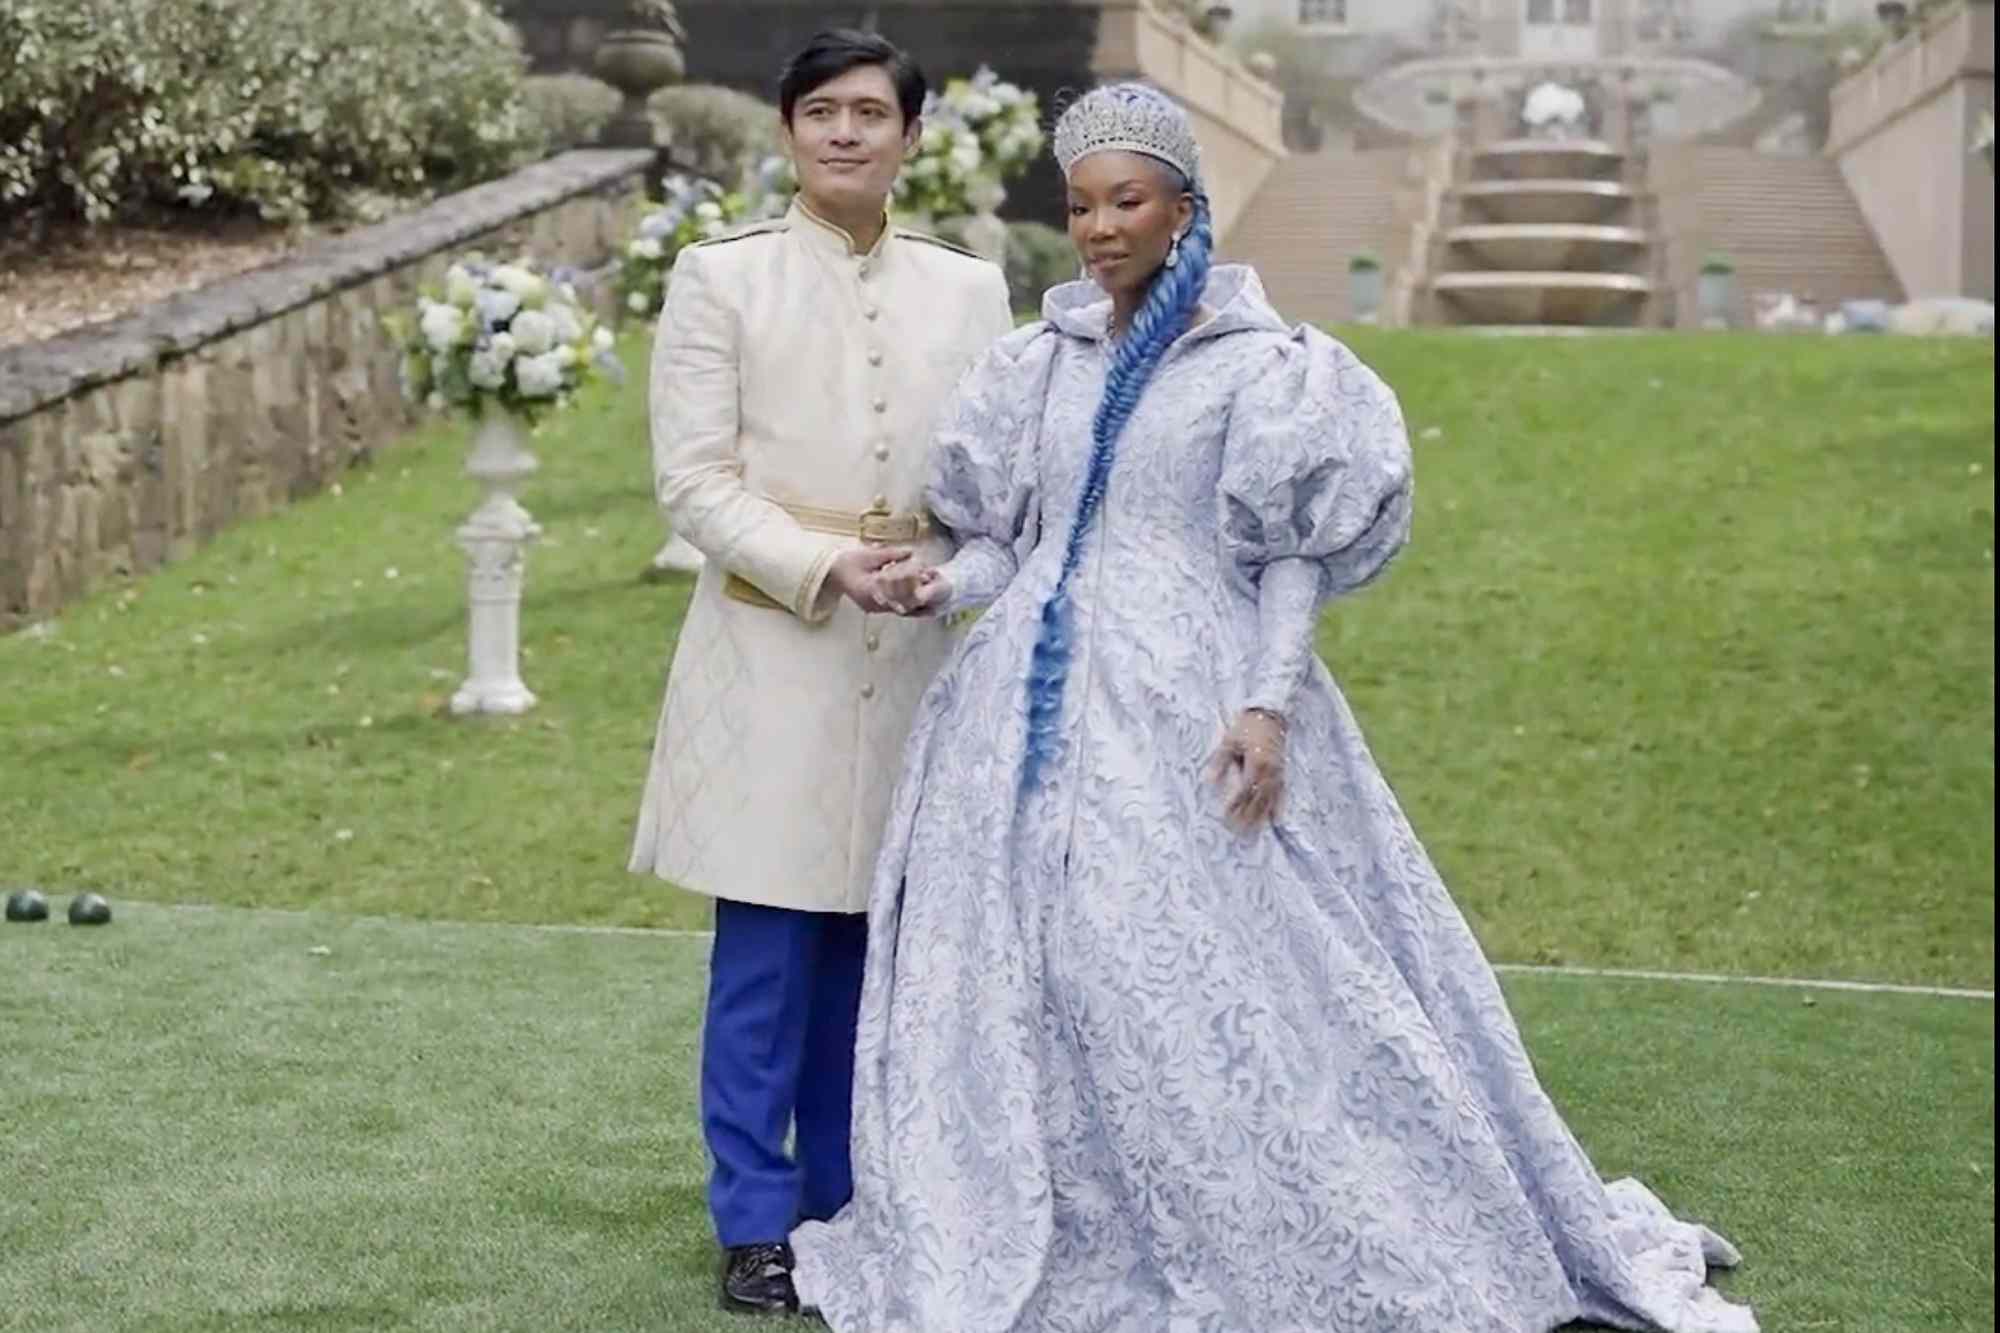 Brandy and Paolo Montalban Discuss 'Surreal' “Cinderella” Reunion for “Descendants”: 'Couldn't Stop Smiling' (Exclusive)